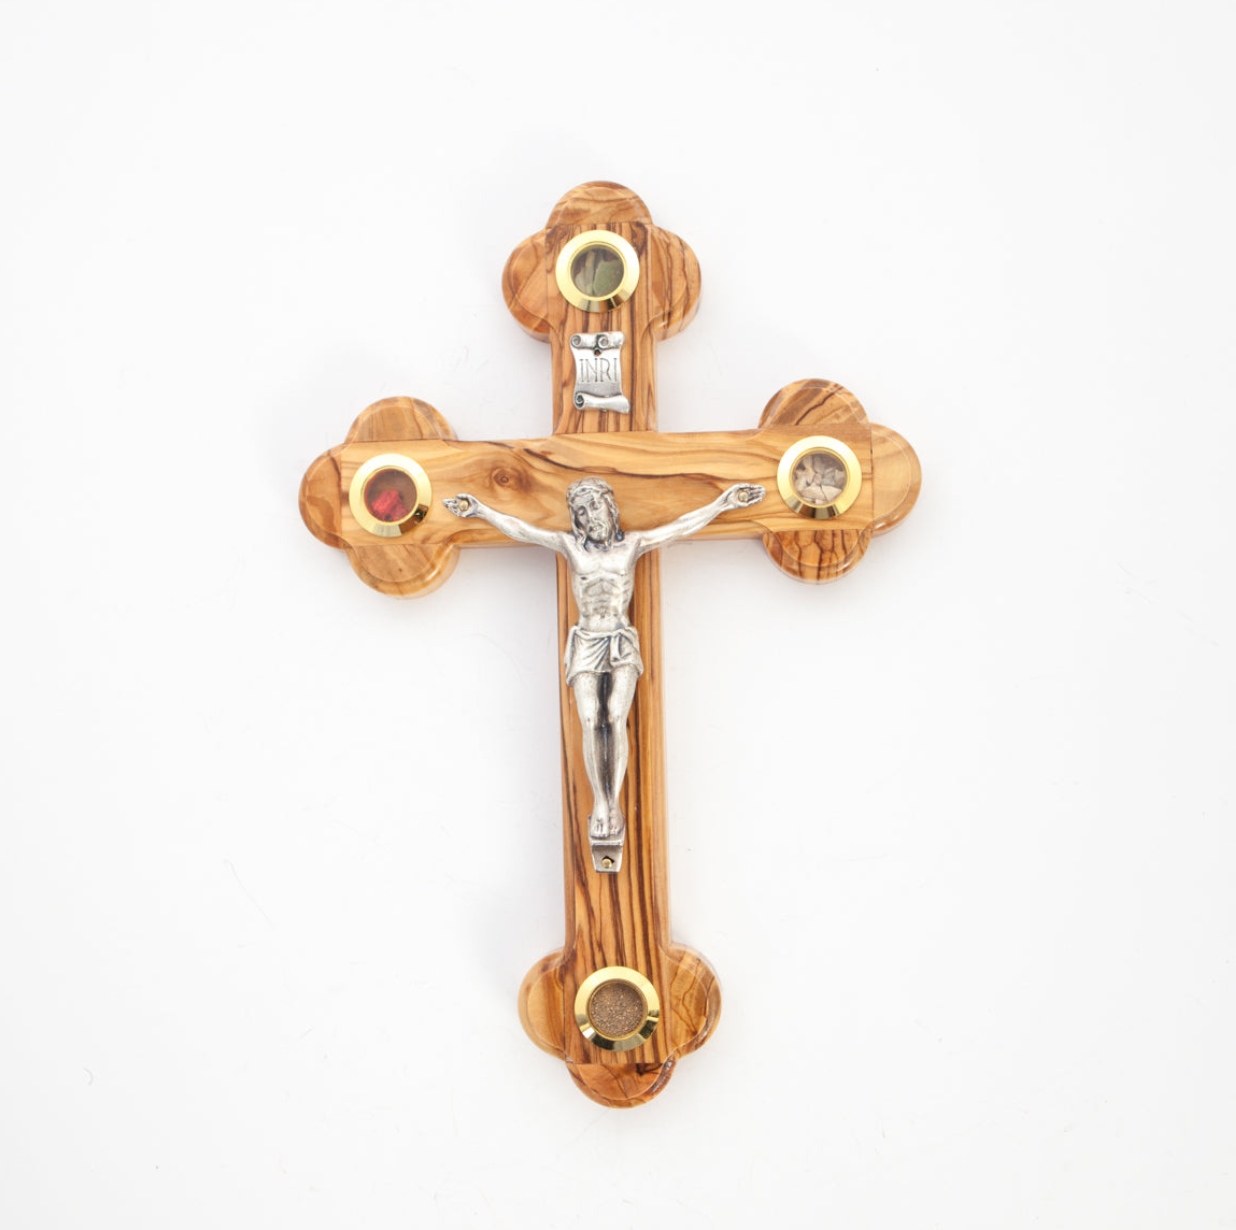 Budded Wall Crucifix Olive Wood From Holy Land 4 Essences Gifts in Glass Capsules